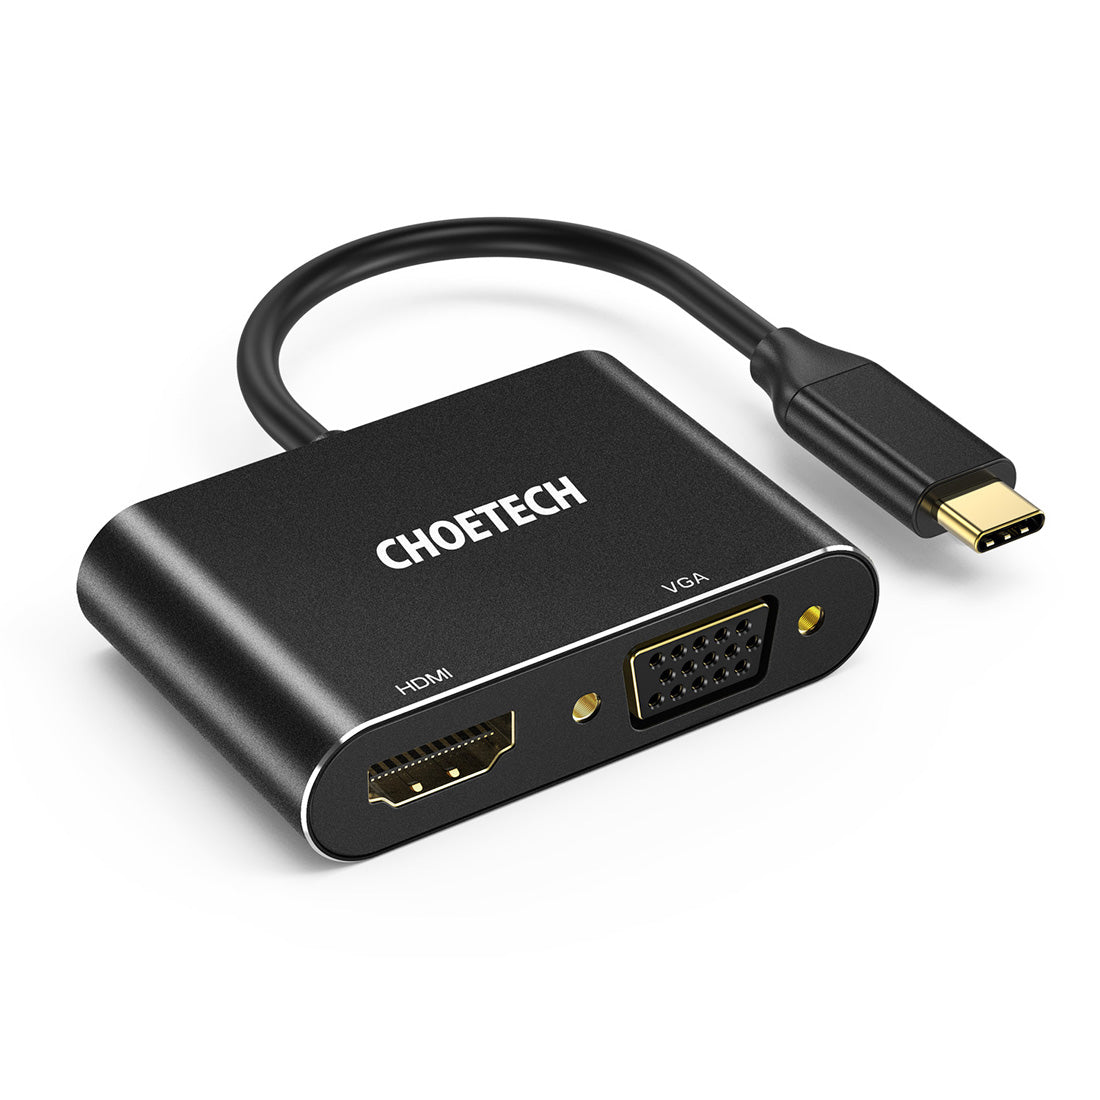 CHOETECH 2 in 1 HUB-M07 USB C to HDMI VGA Adapter CHOETECH OFFICIAL